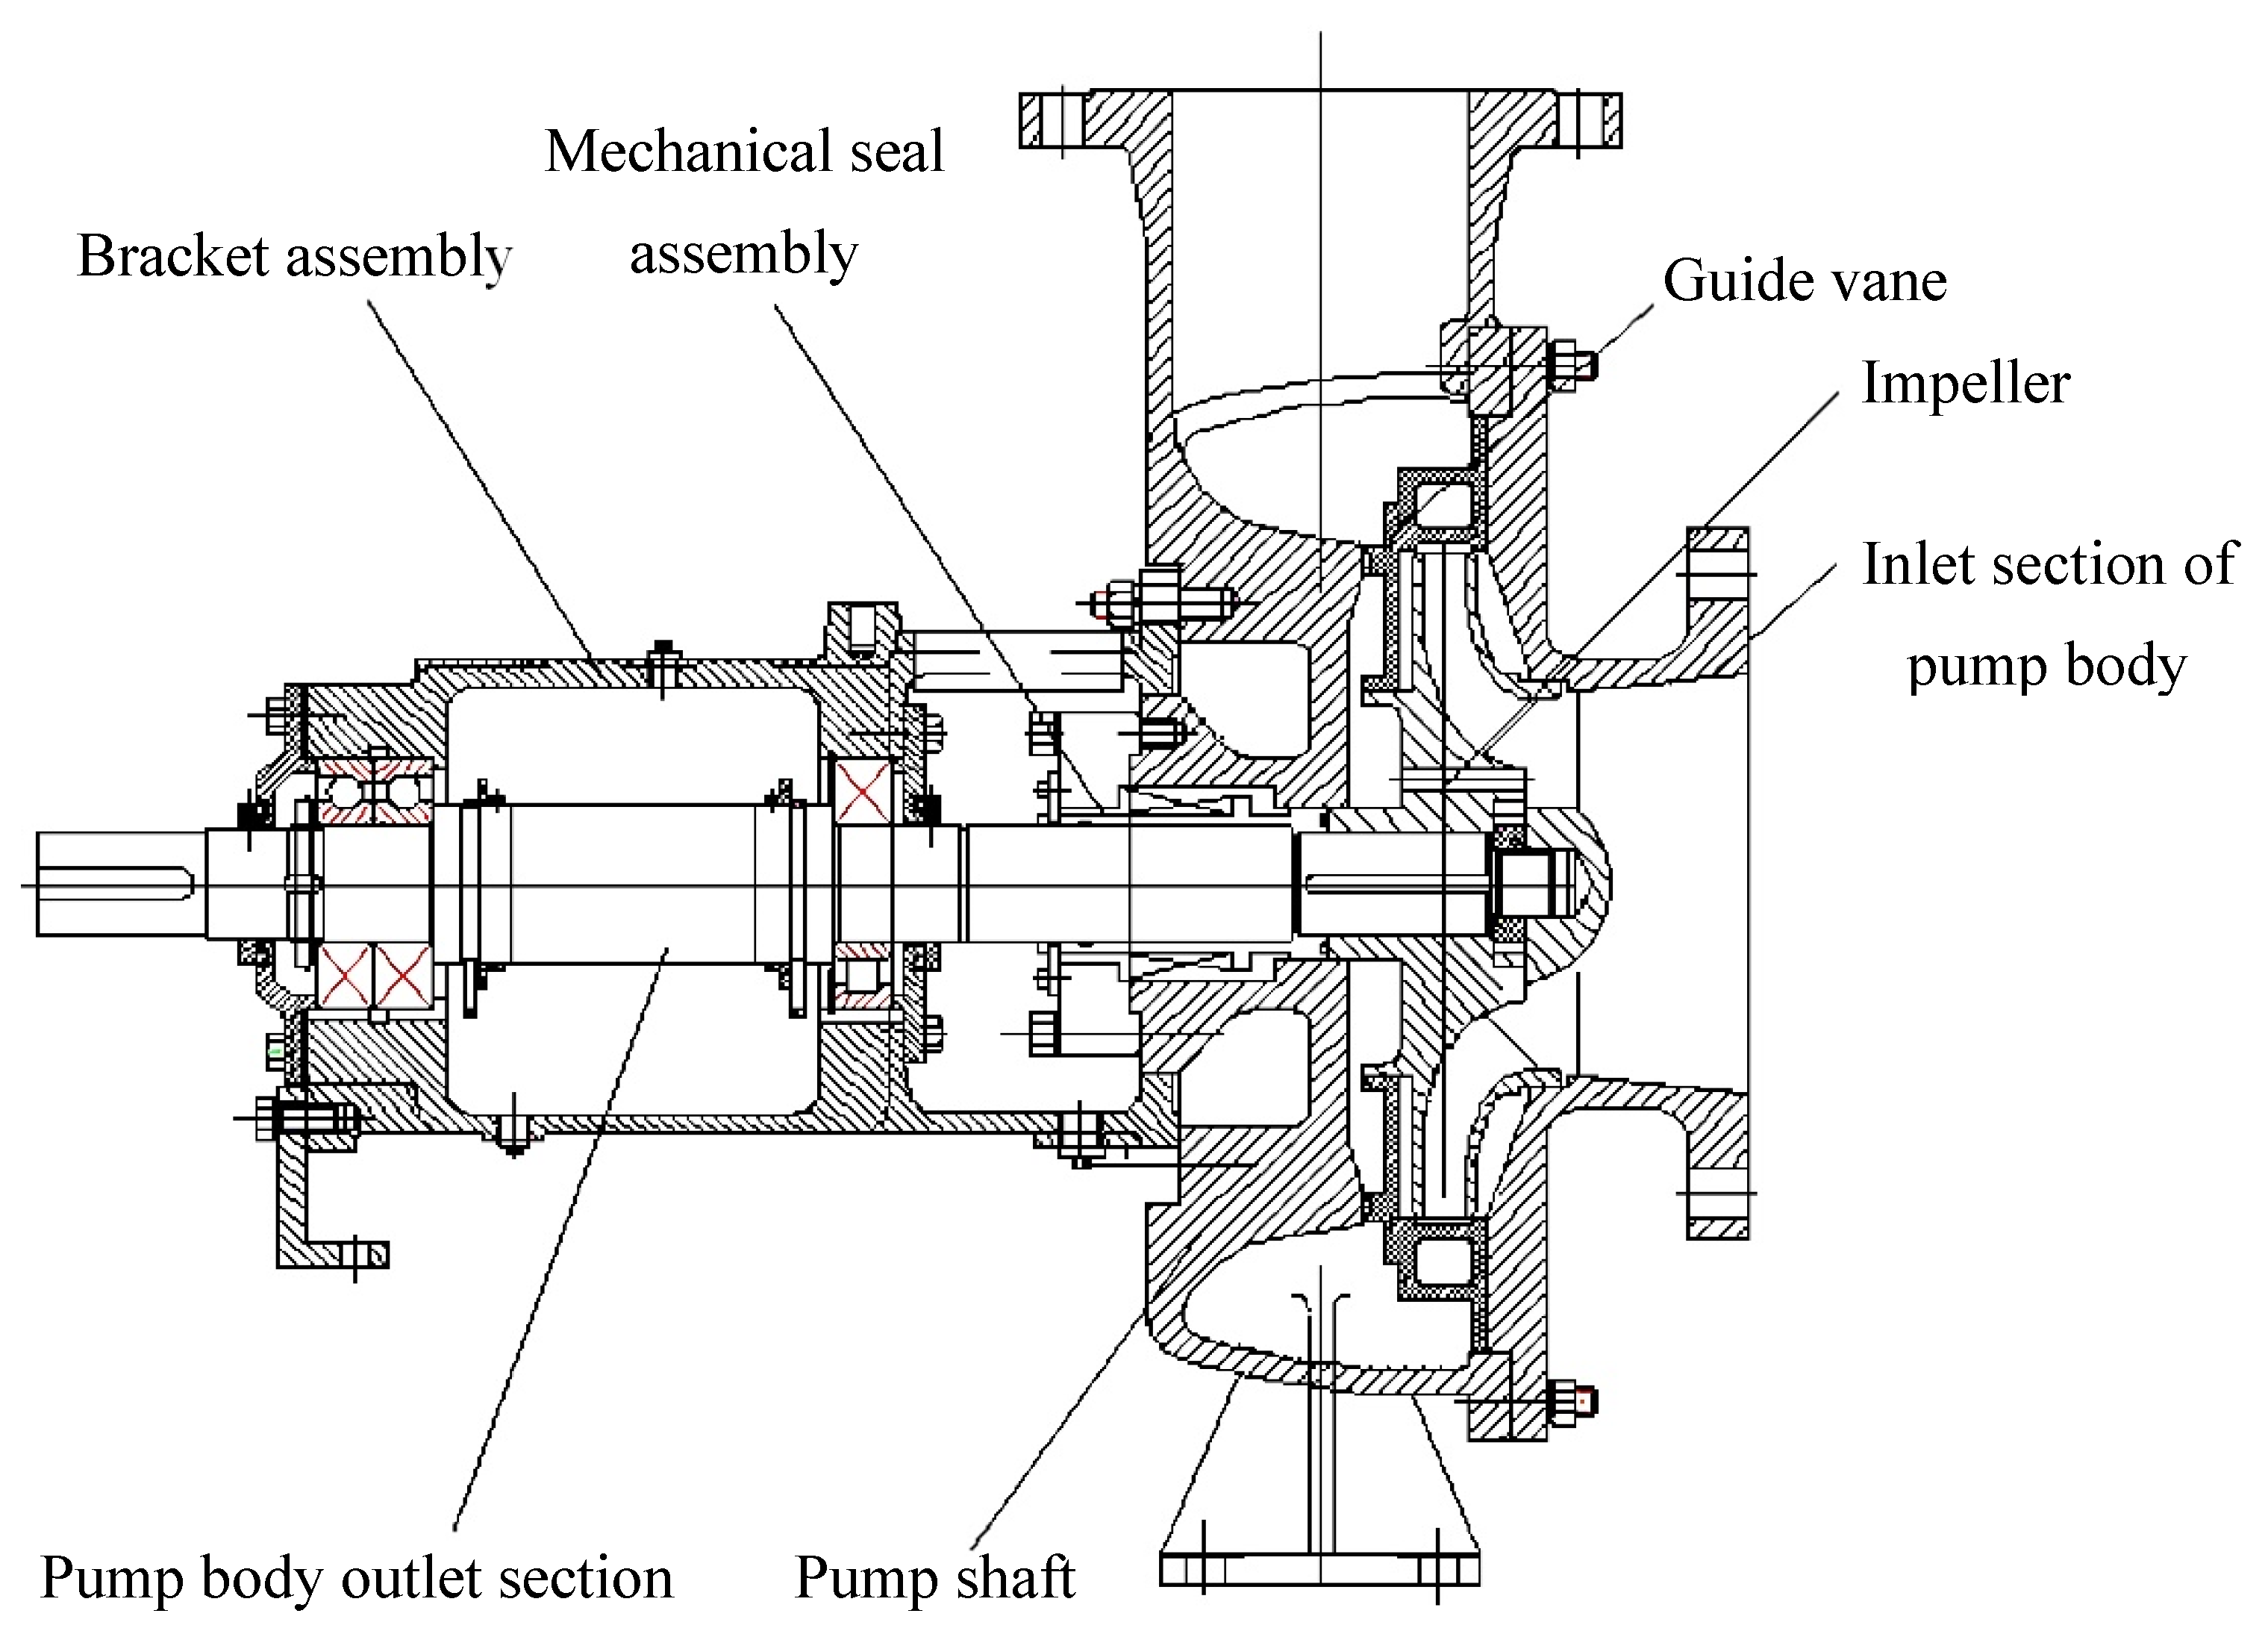 Displacement Axial flow and Centrifugal Pumps for Ship Use